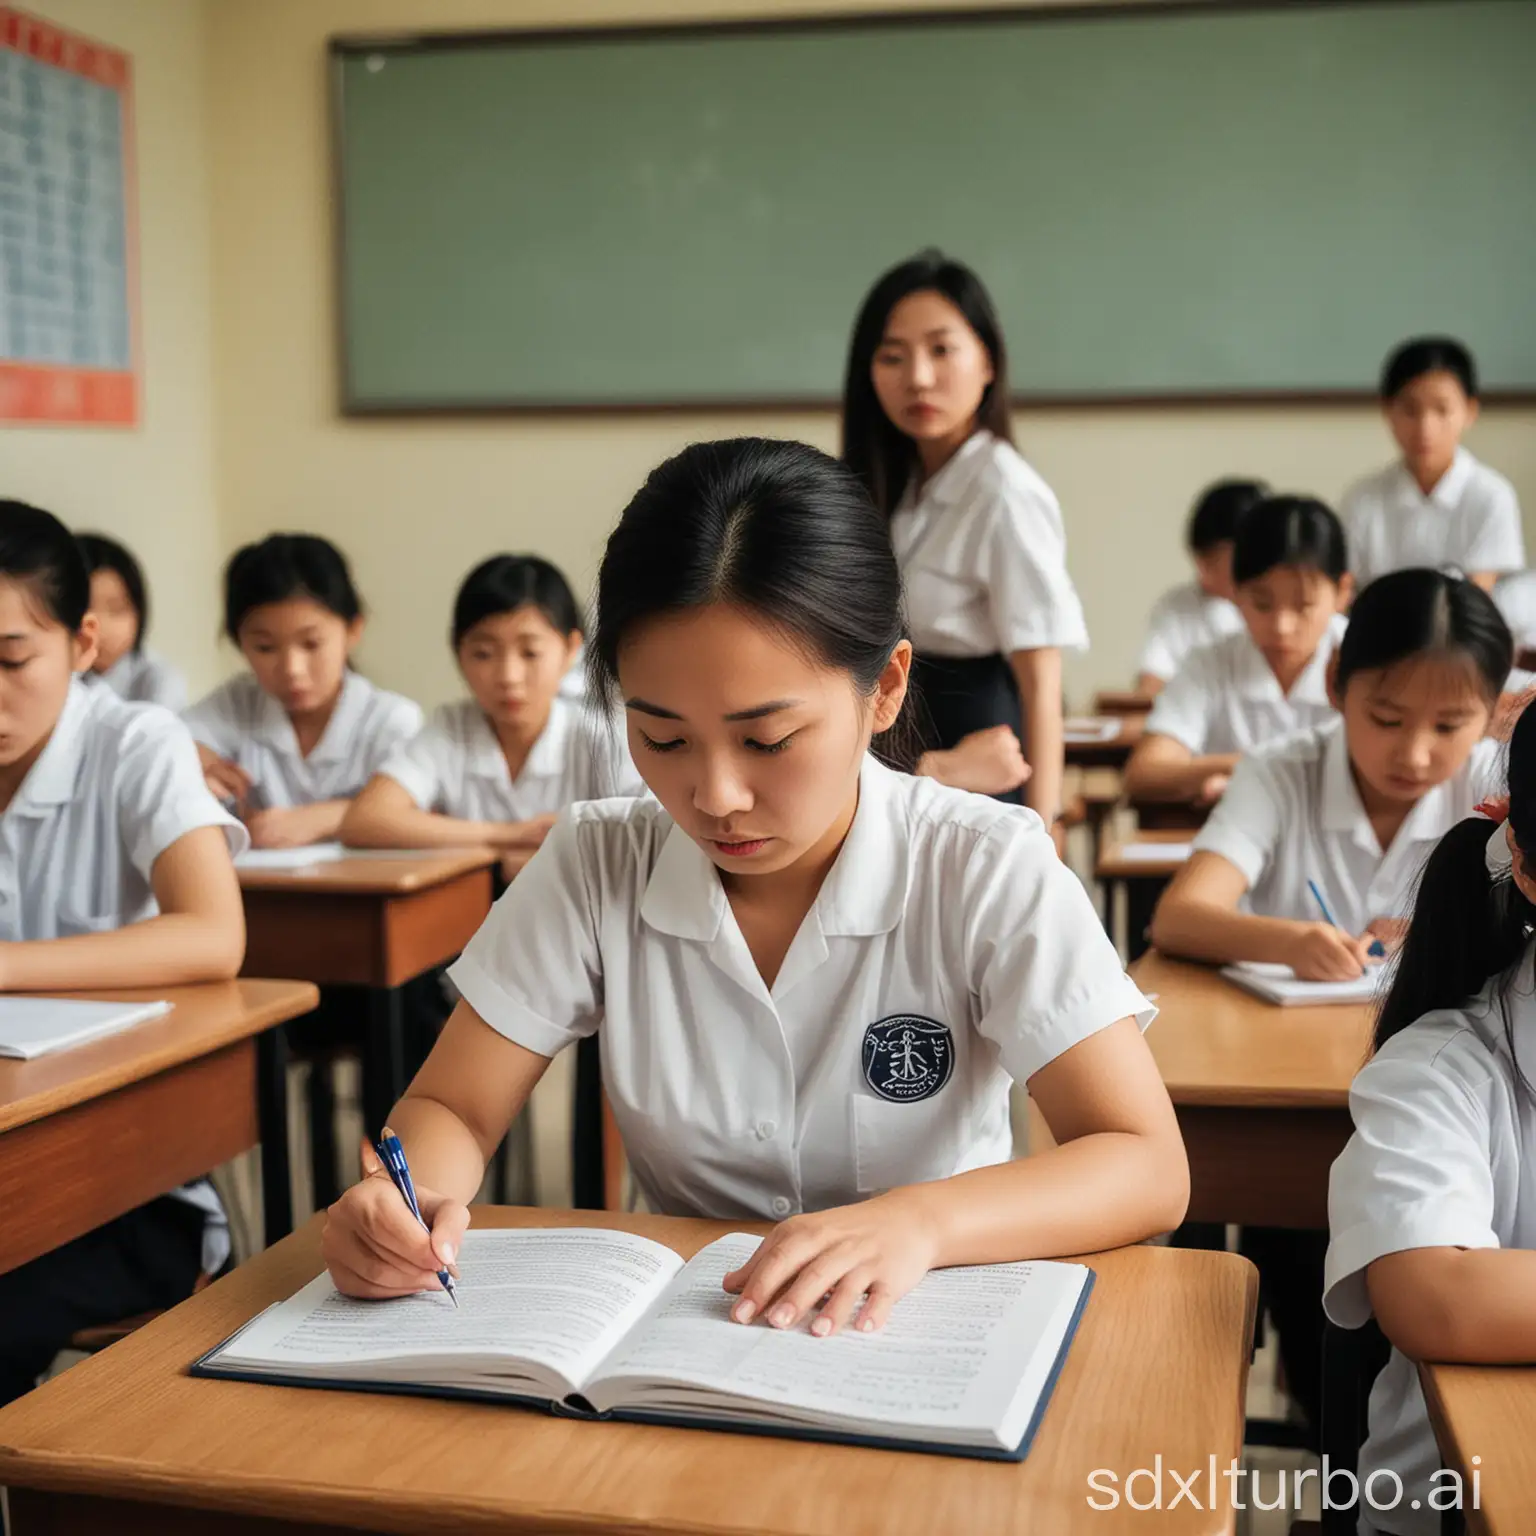 Disciplined-Chinese-Classroom-with-Stern-Teacher